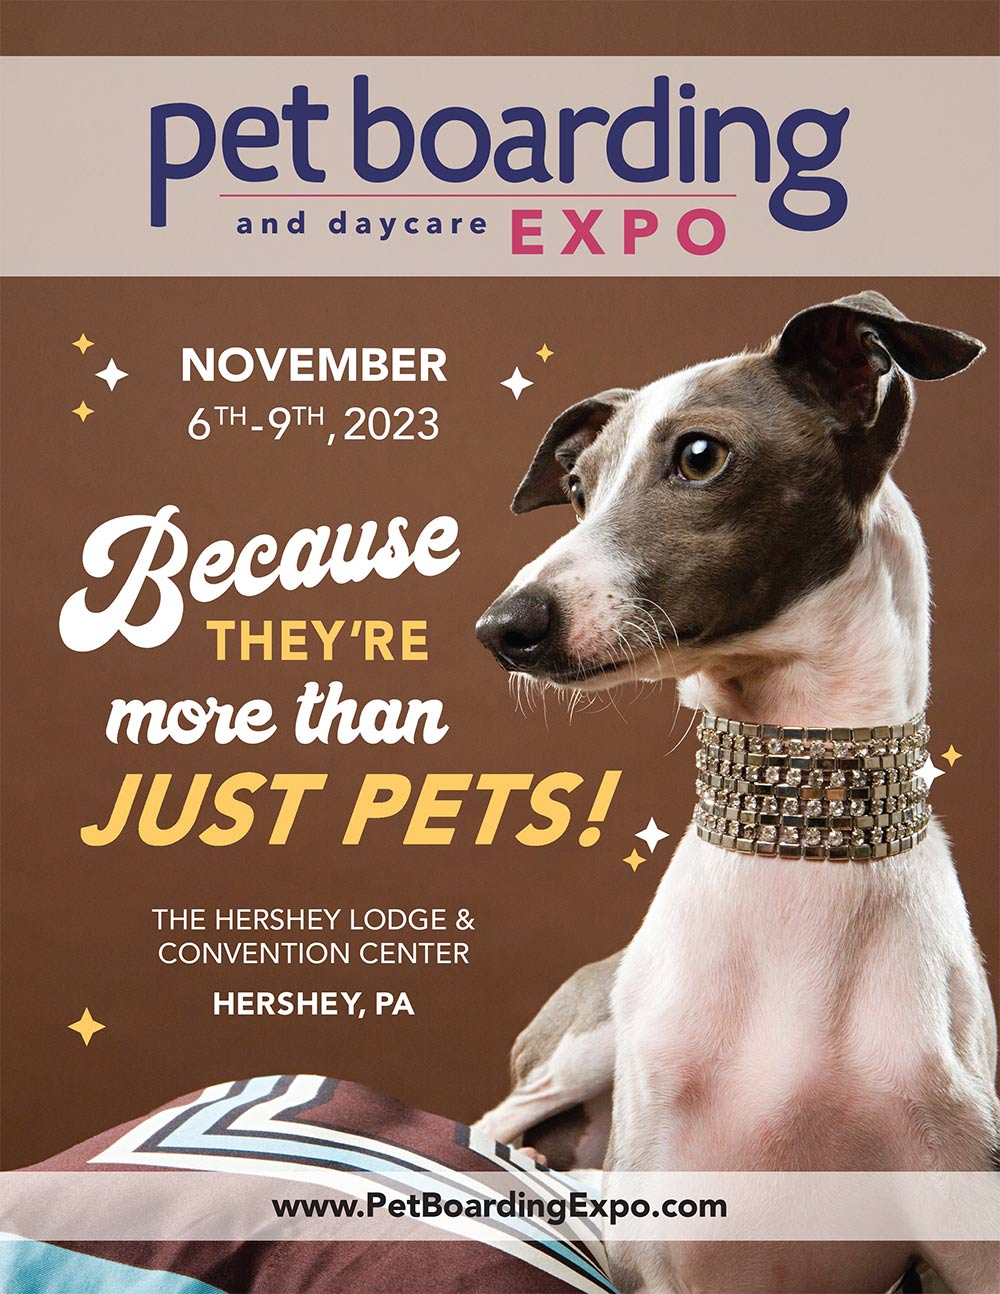 Pet Boarding and Expo Advertisement